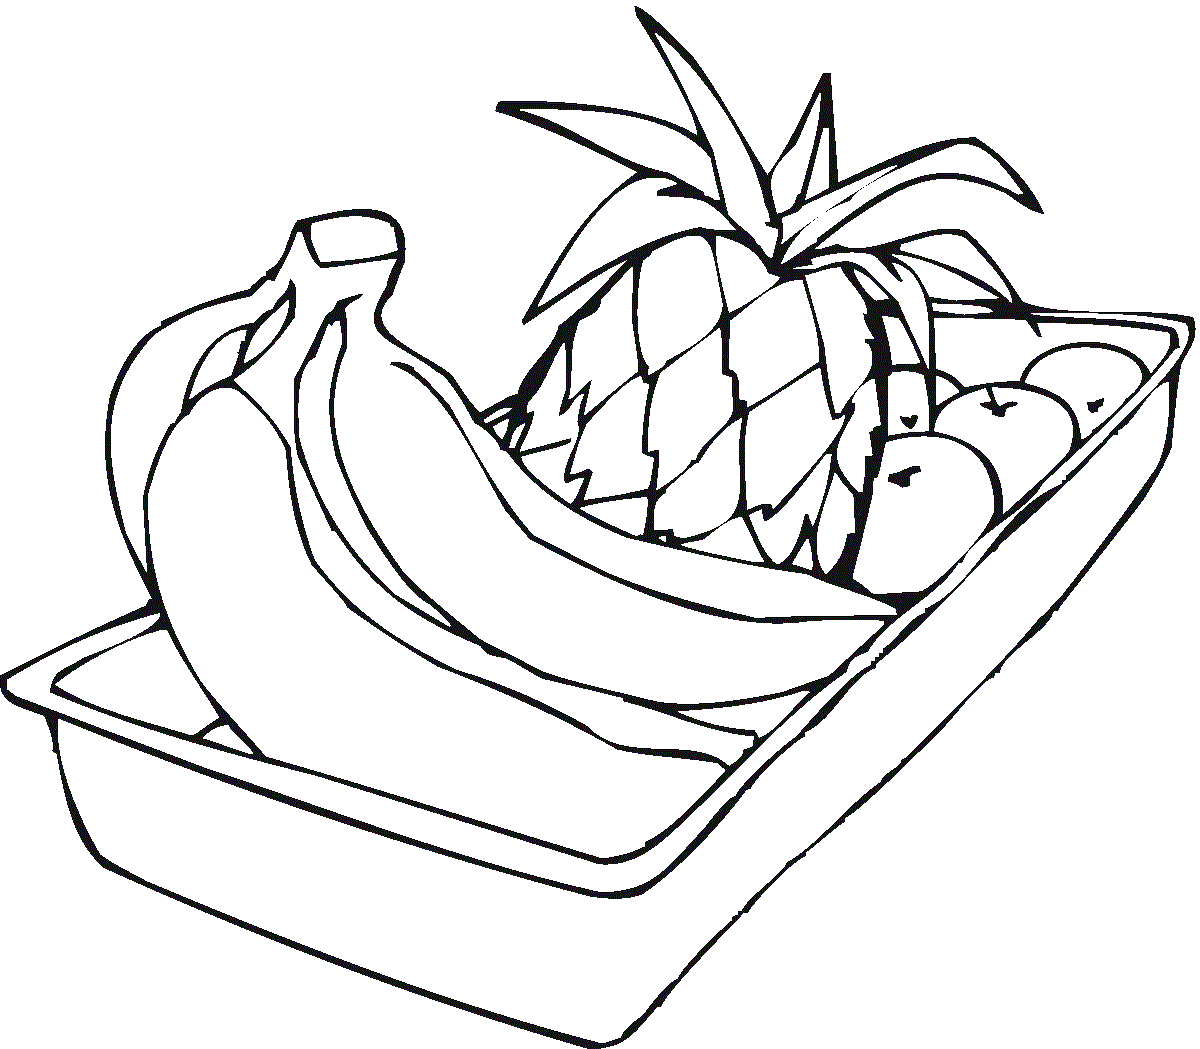 Bowl Of fruit With Banana And Others